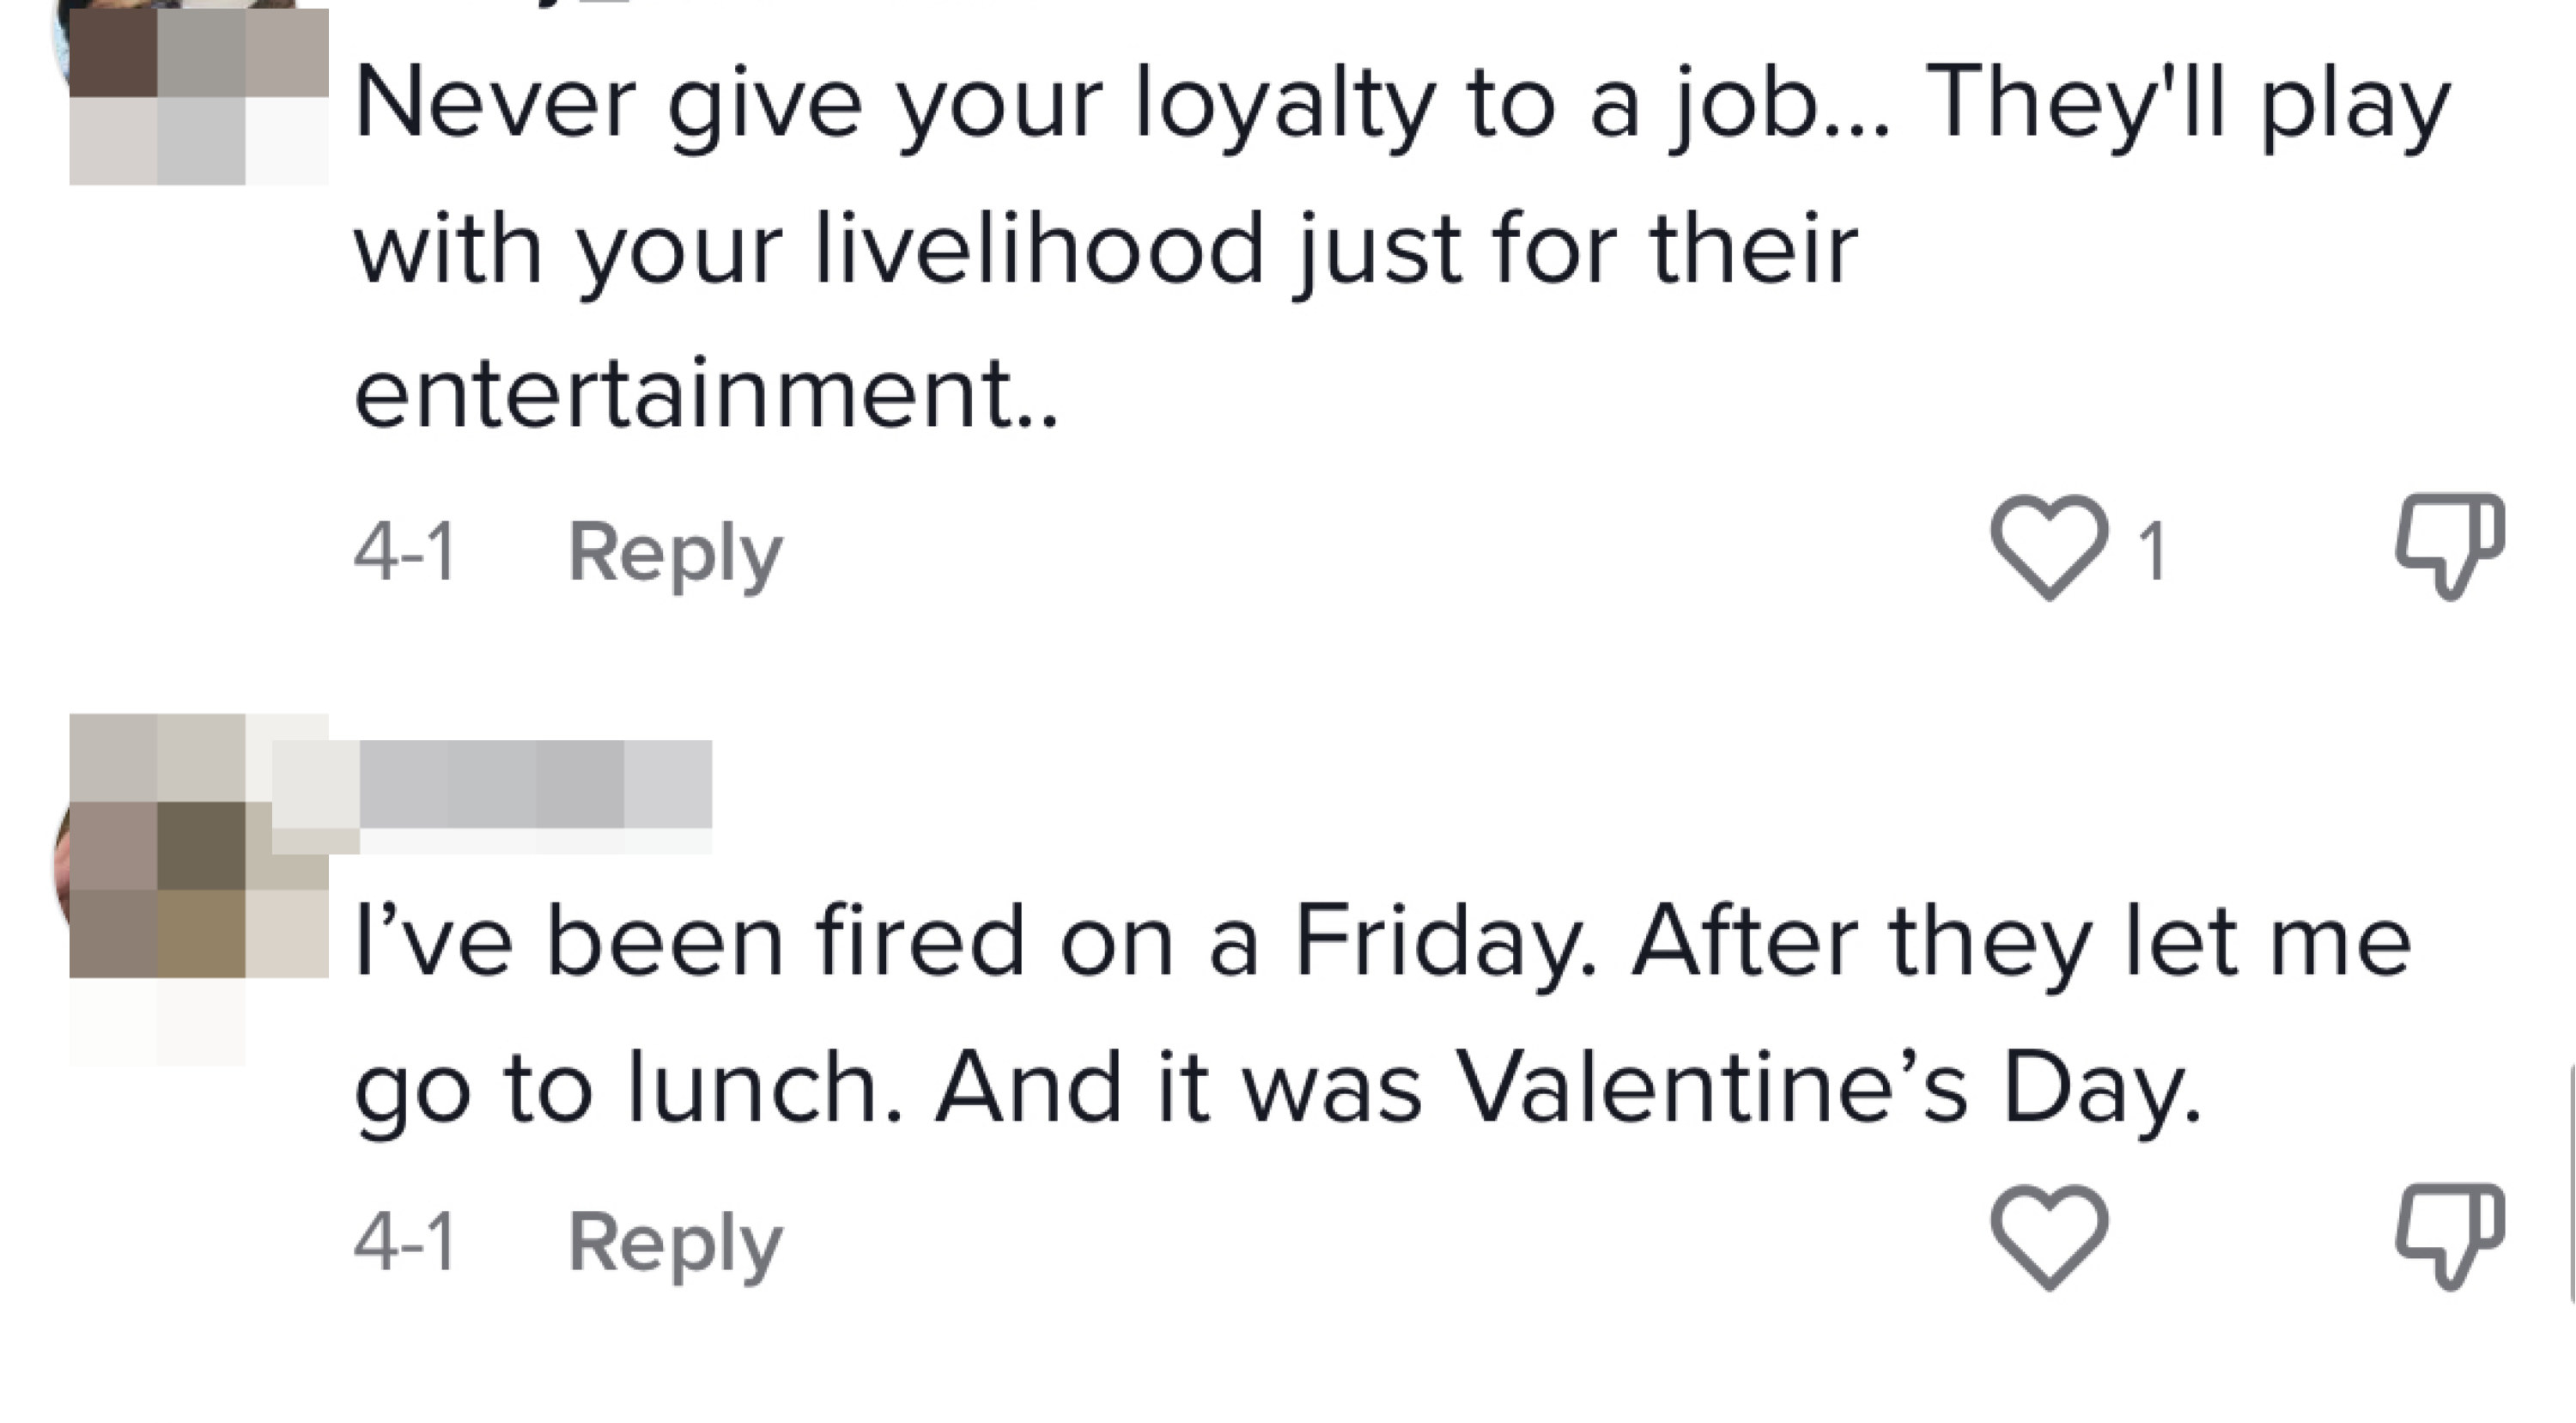 A comment reads &quot;Never give your loyalty to a job...They&#x27;ll play with your livelihood just for their entertainment&quot;